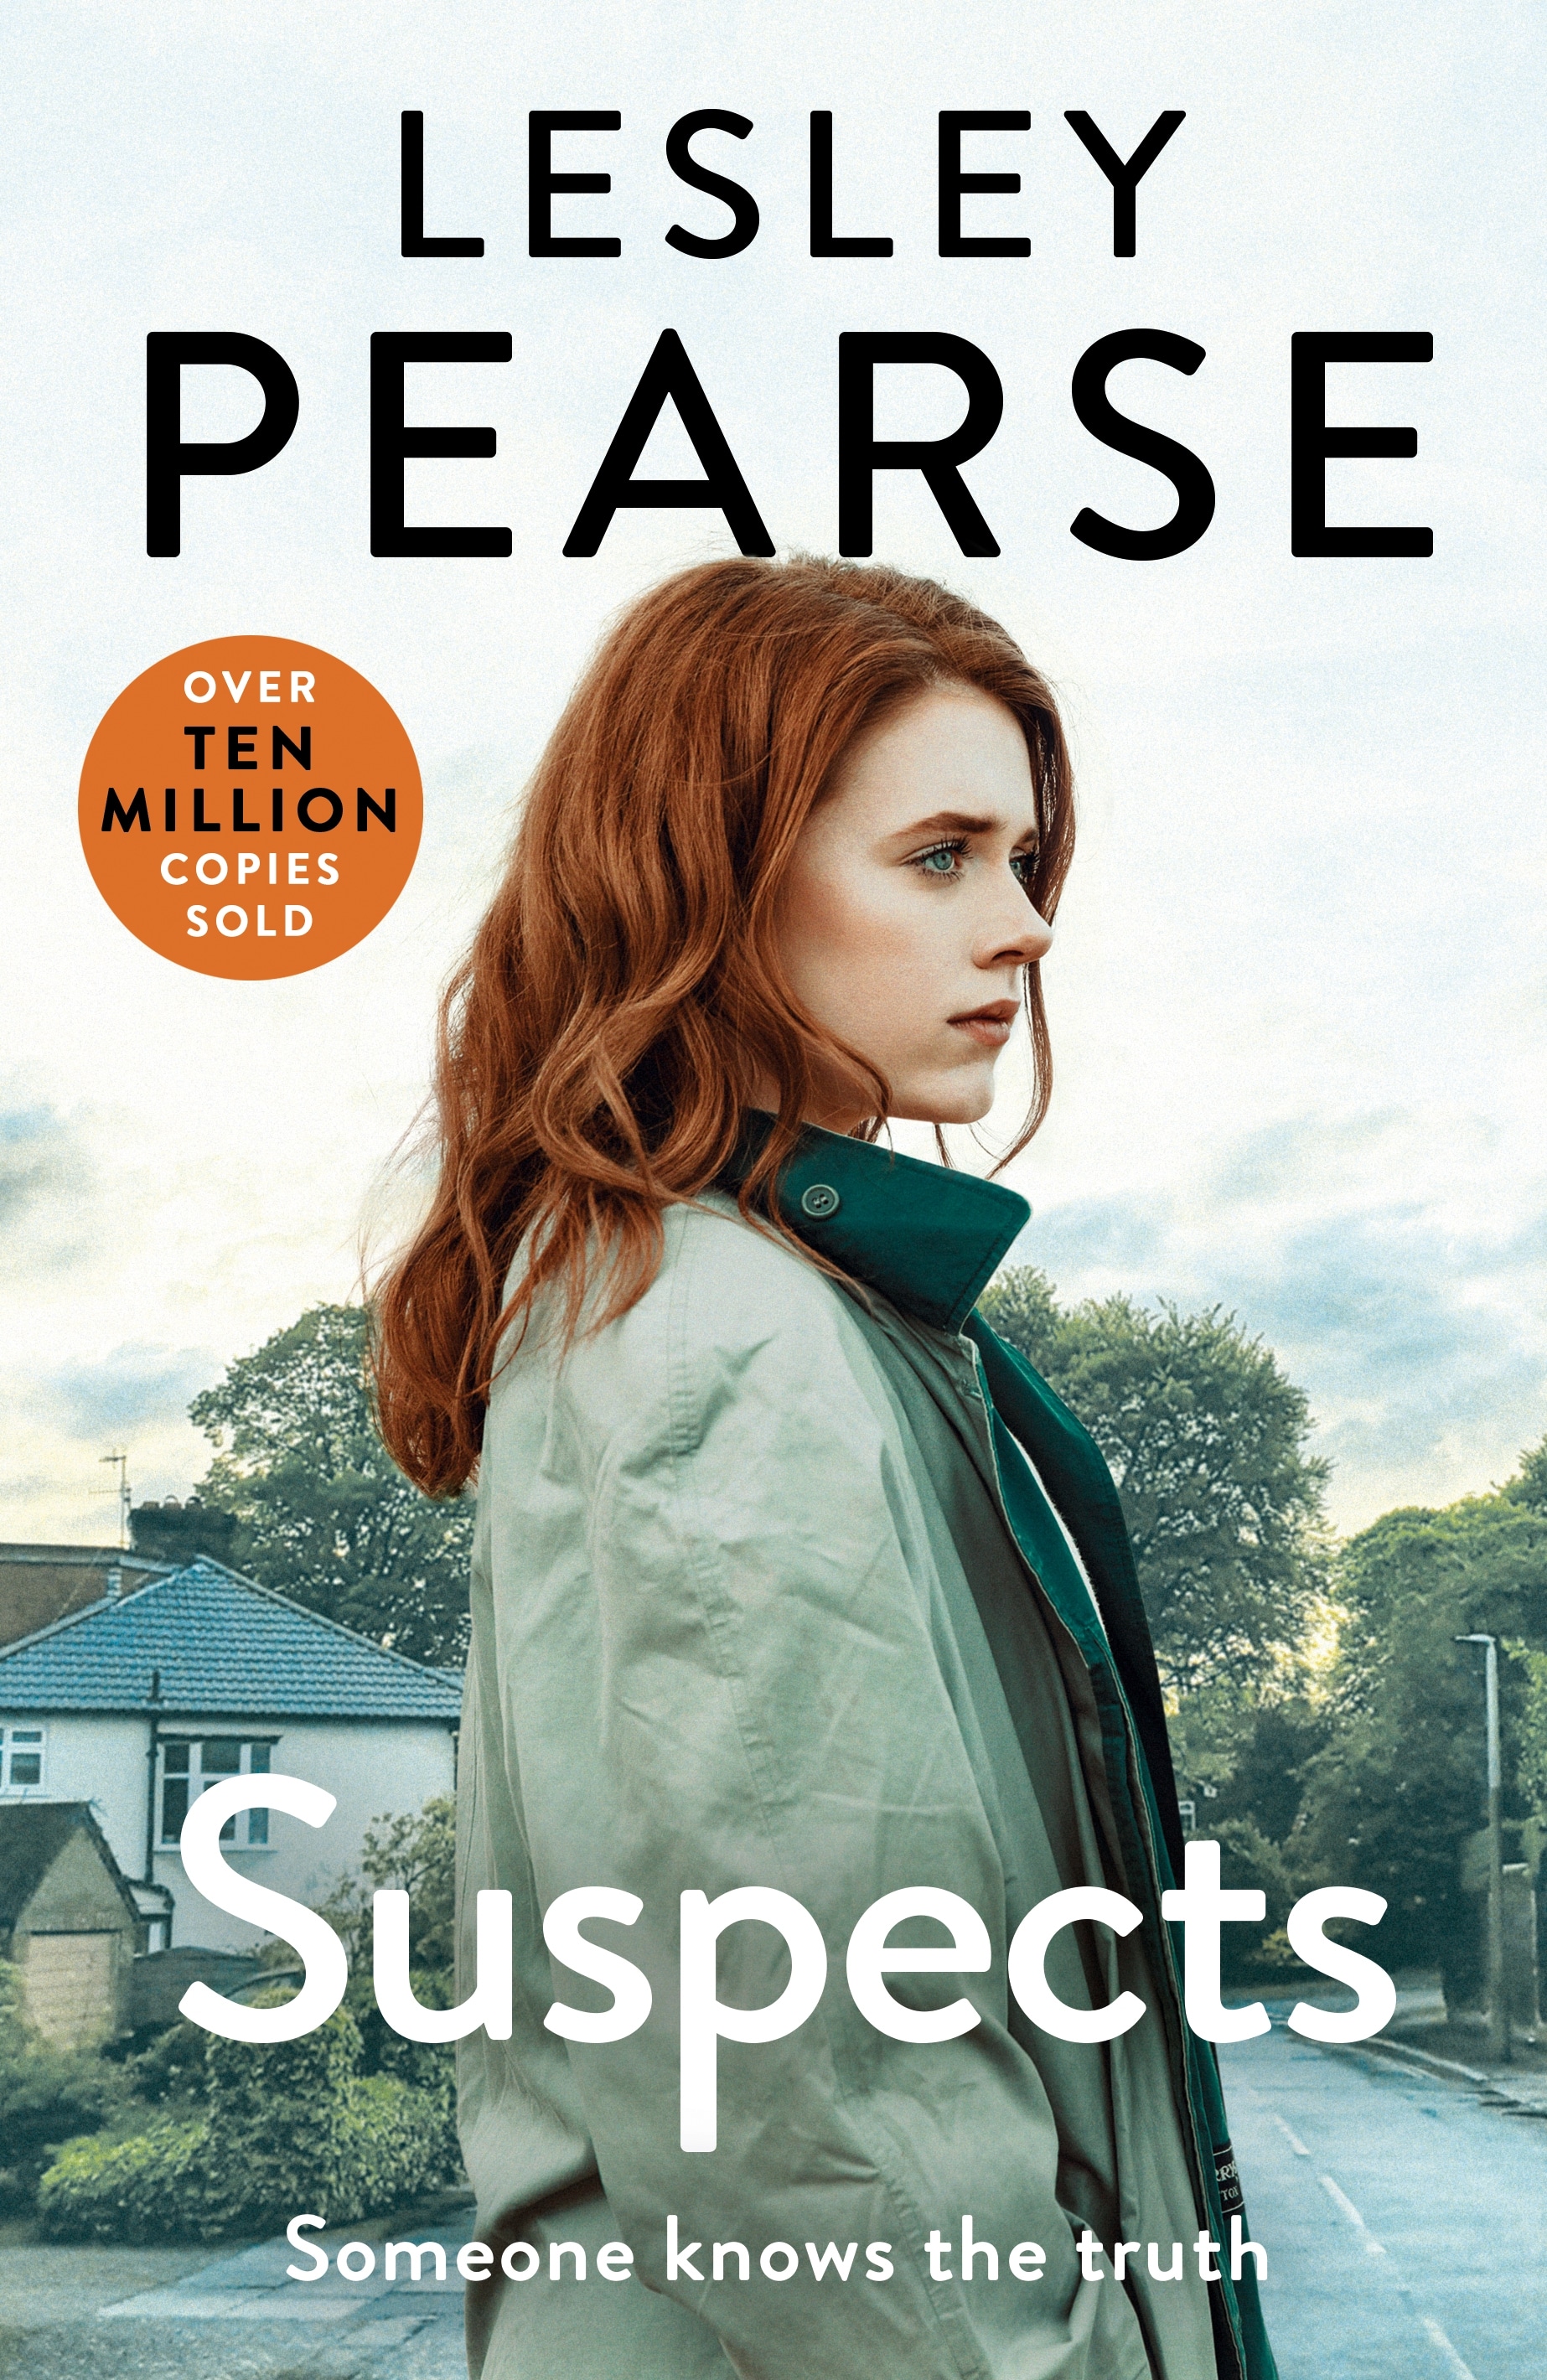 Book “Suspects” by Lesley Pearse — June 24, 2021